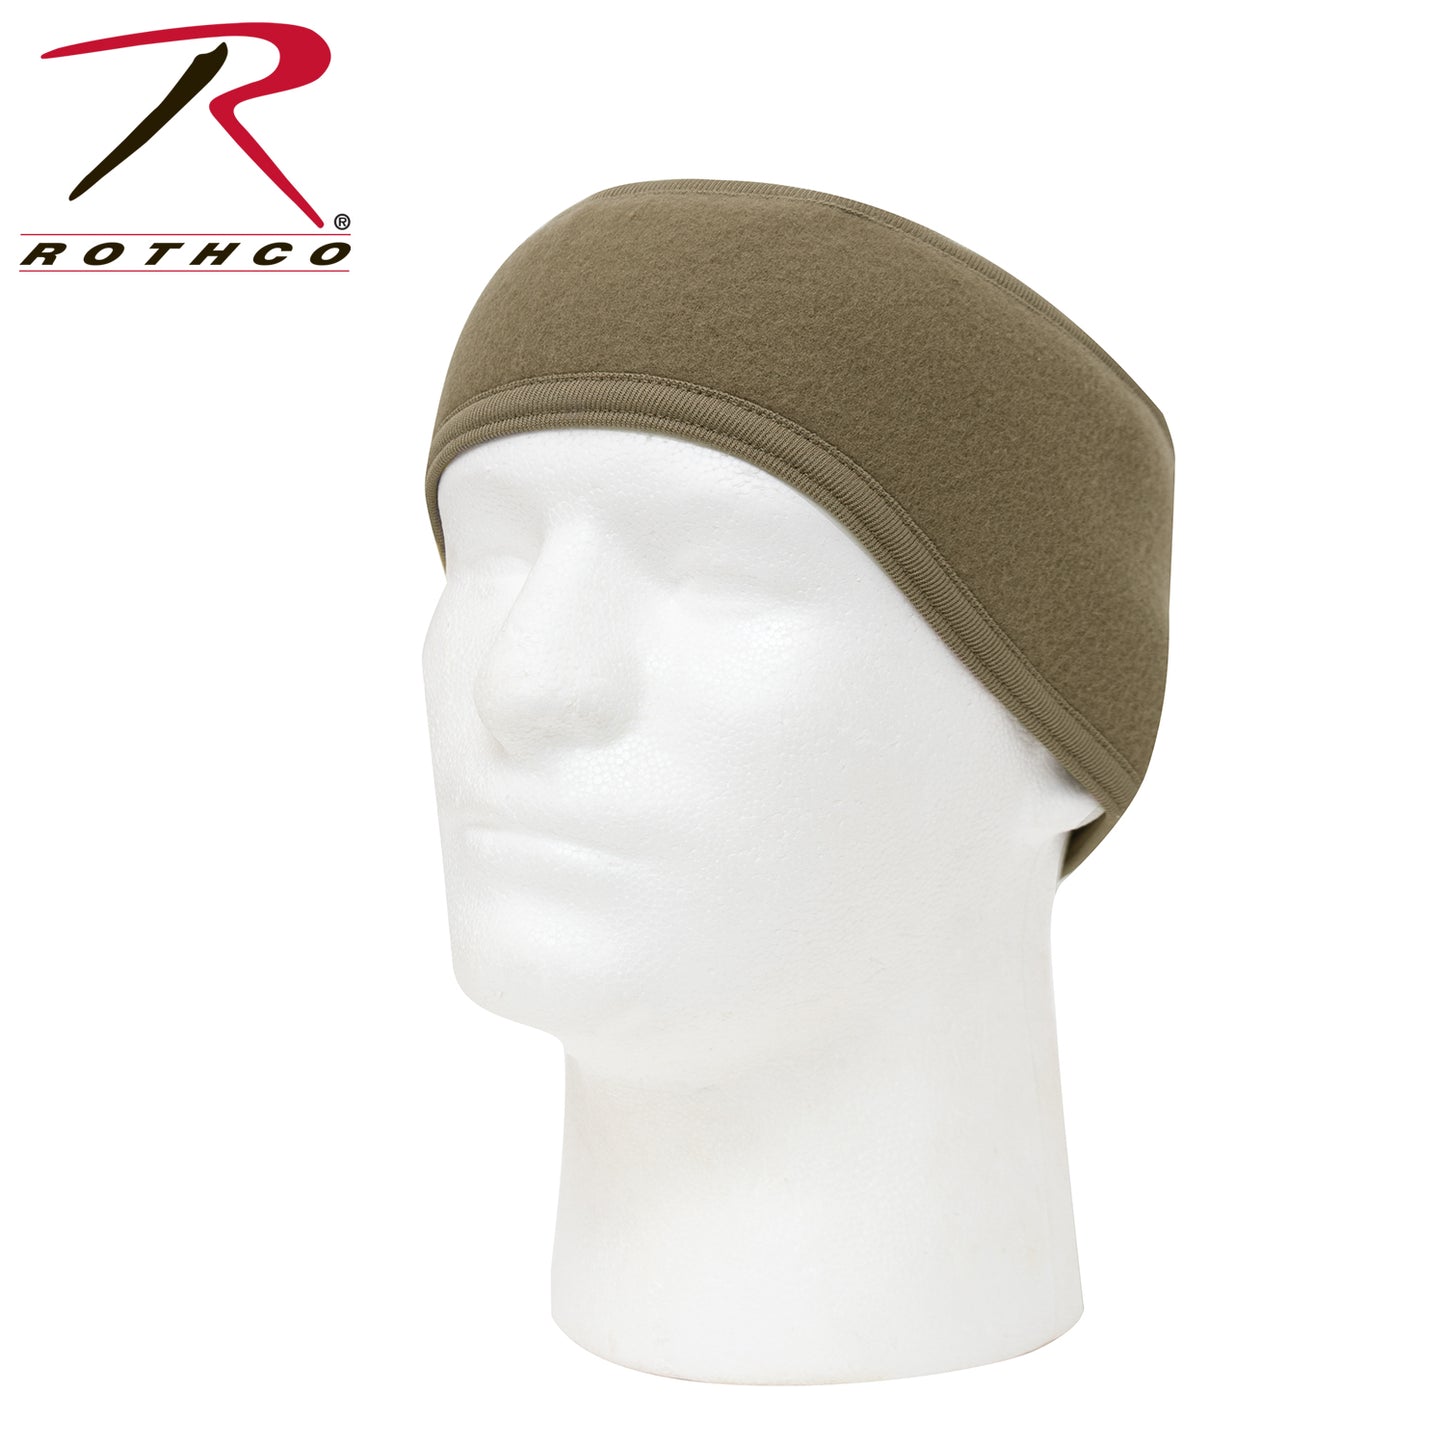 Coyote Brown Double Layer Headband - Rothco Winter ECWCS Polyester Ear Warmer